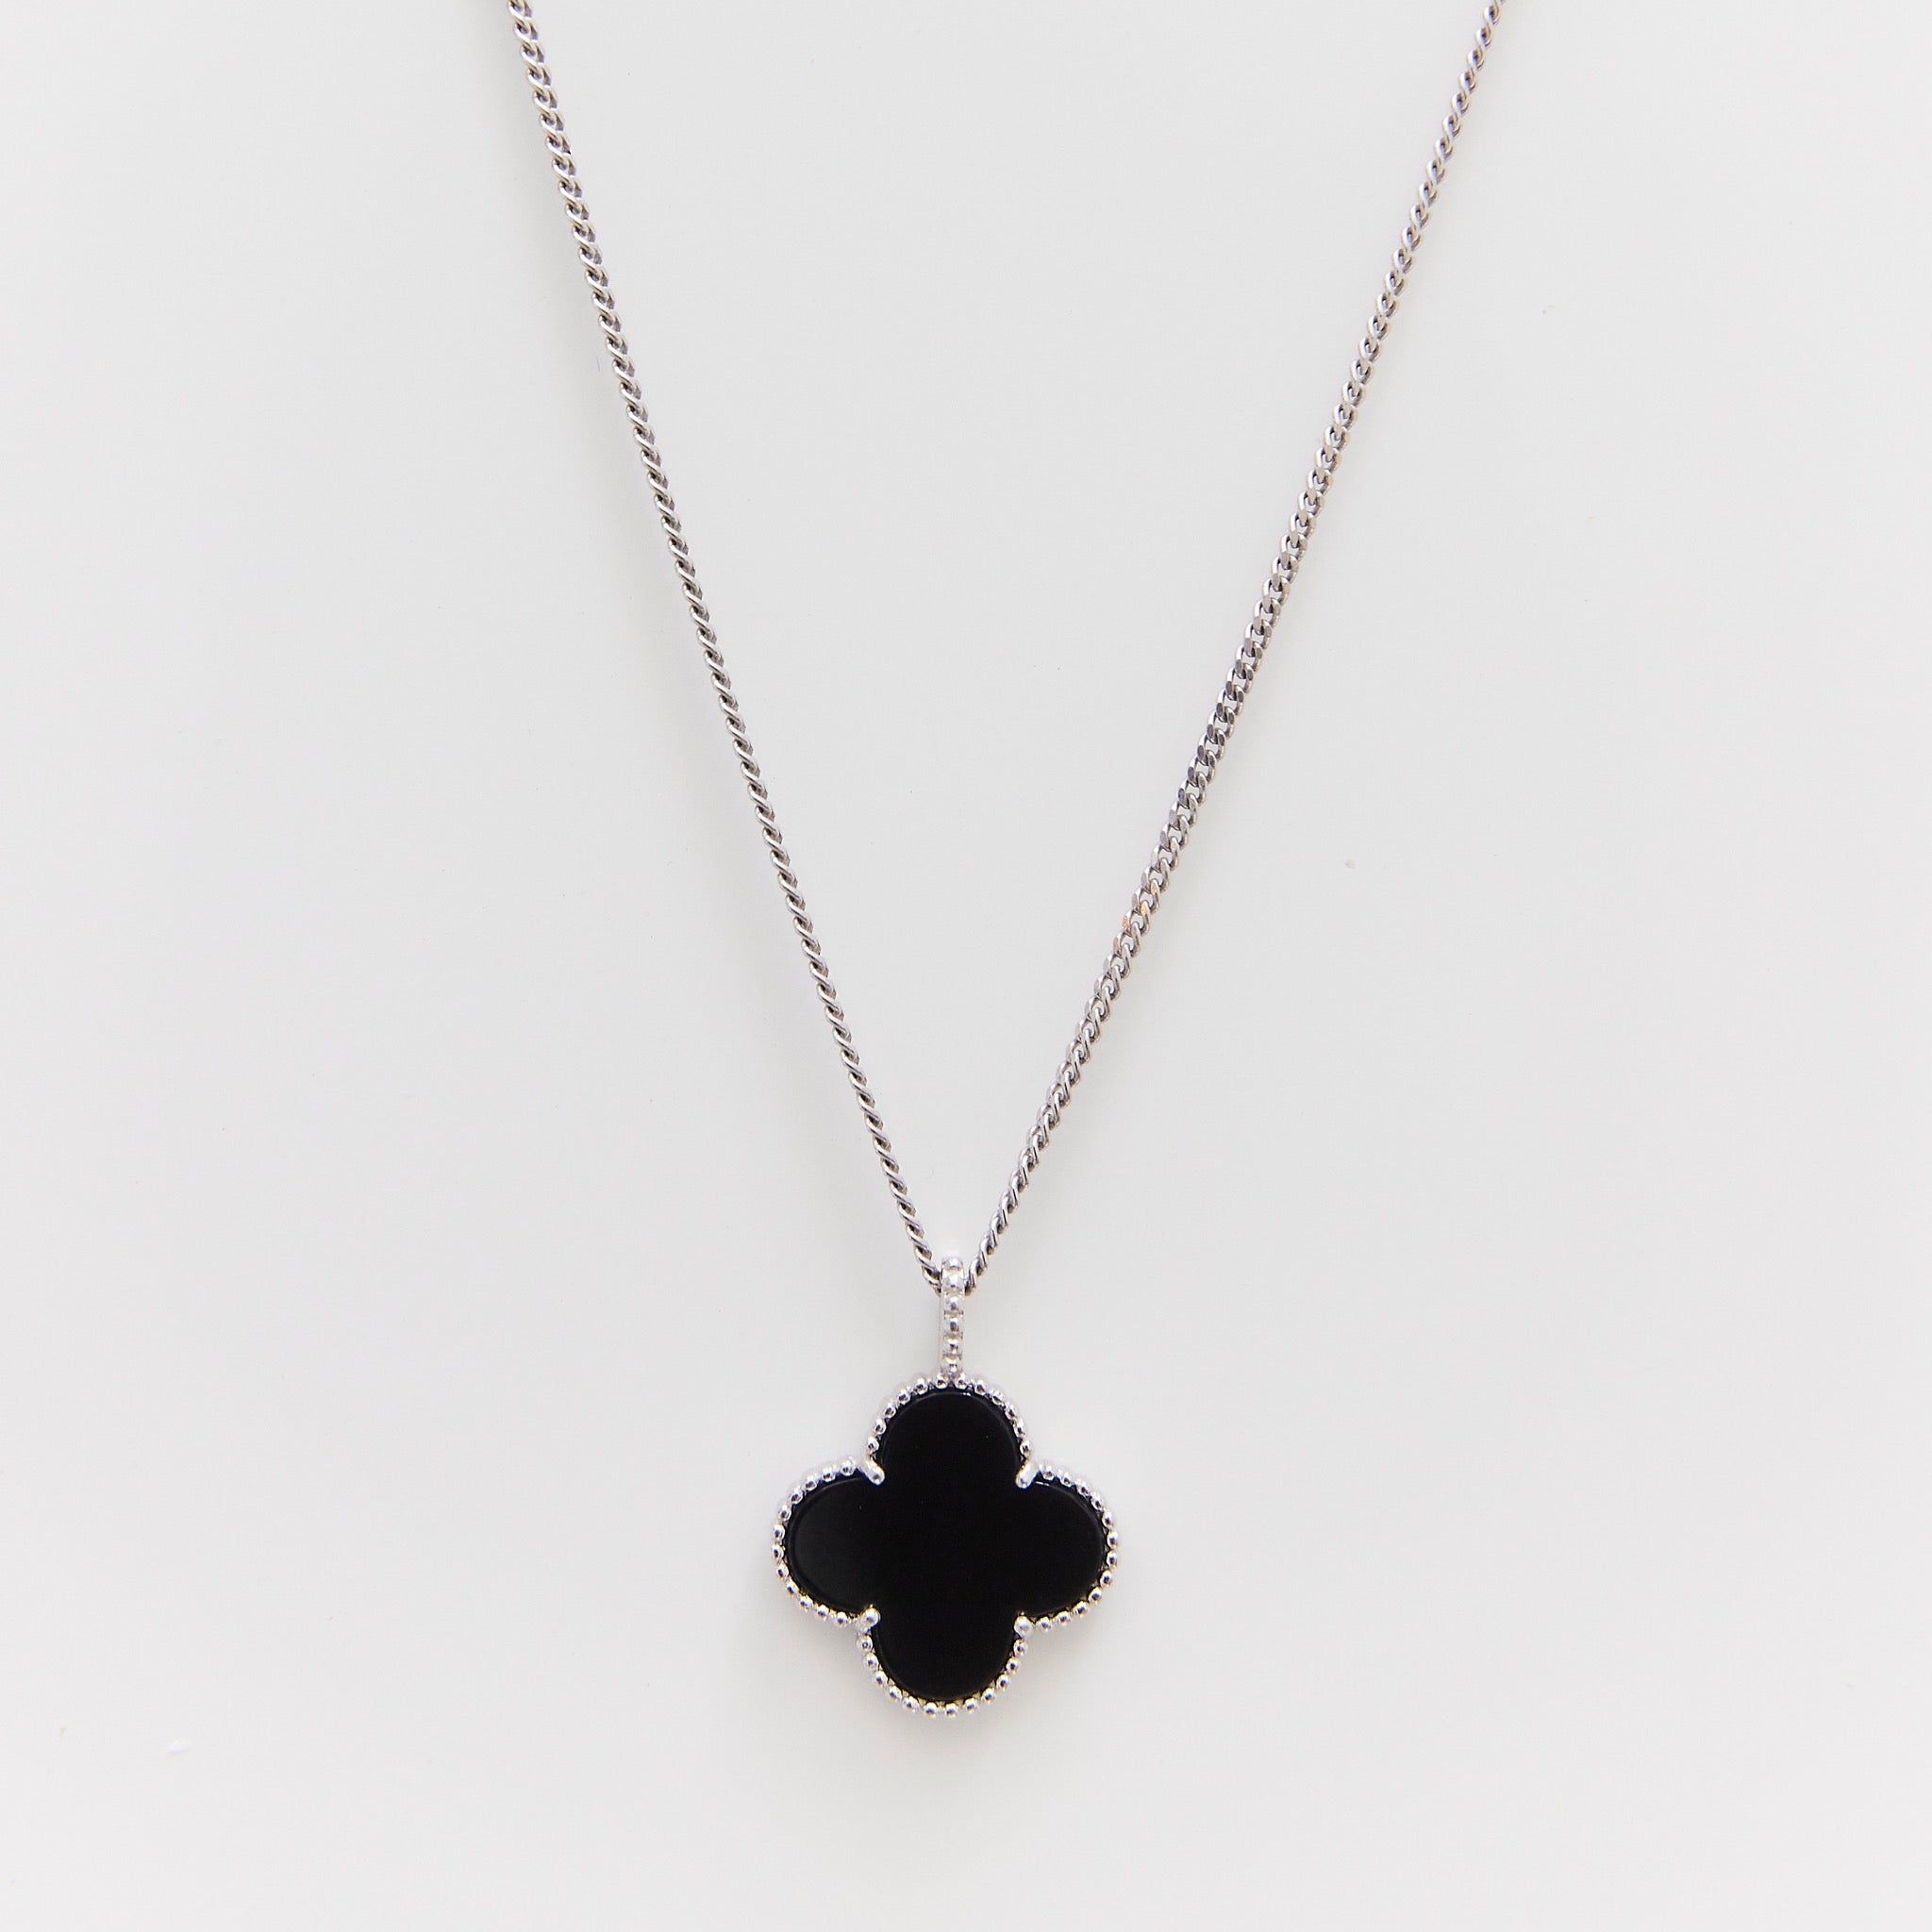 Amazon.com: Black Onyx Clover Necklace for Women, Black Onyx Clover Bead on  Sterling Silver Necklace Chain, Good Luck Charm Layering Choker Necklace  (16 inches plus 2-inch extender) : Handmade Products